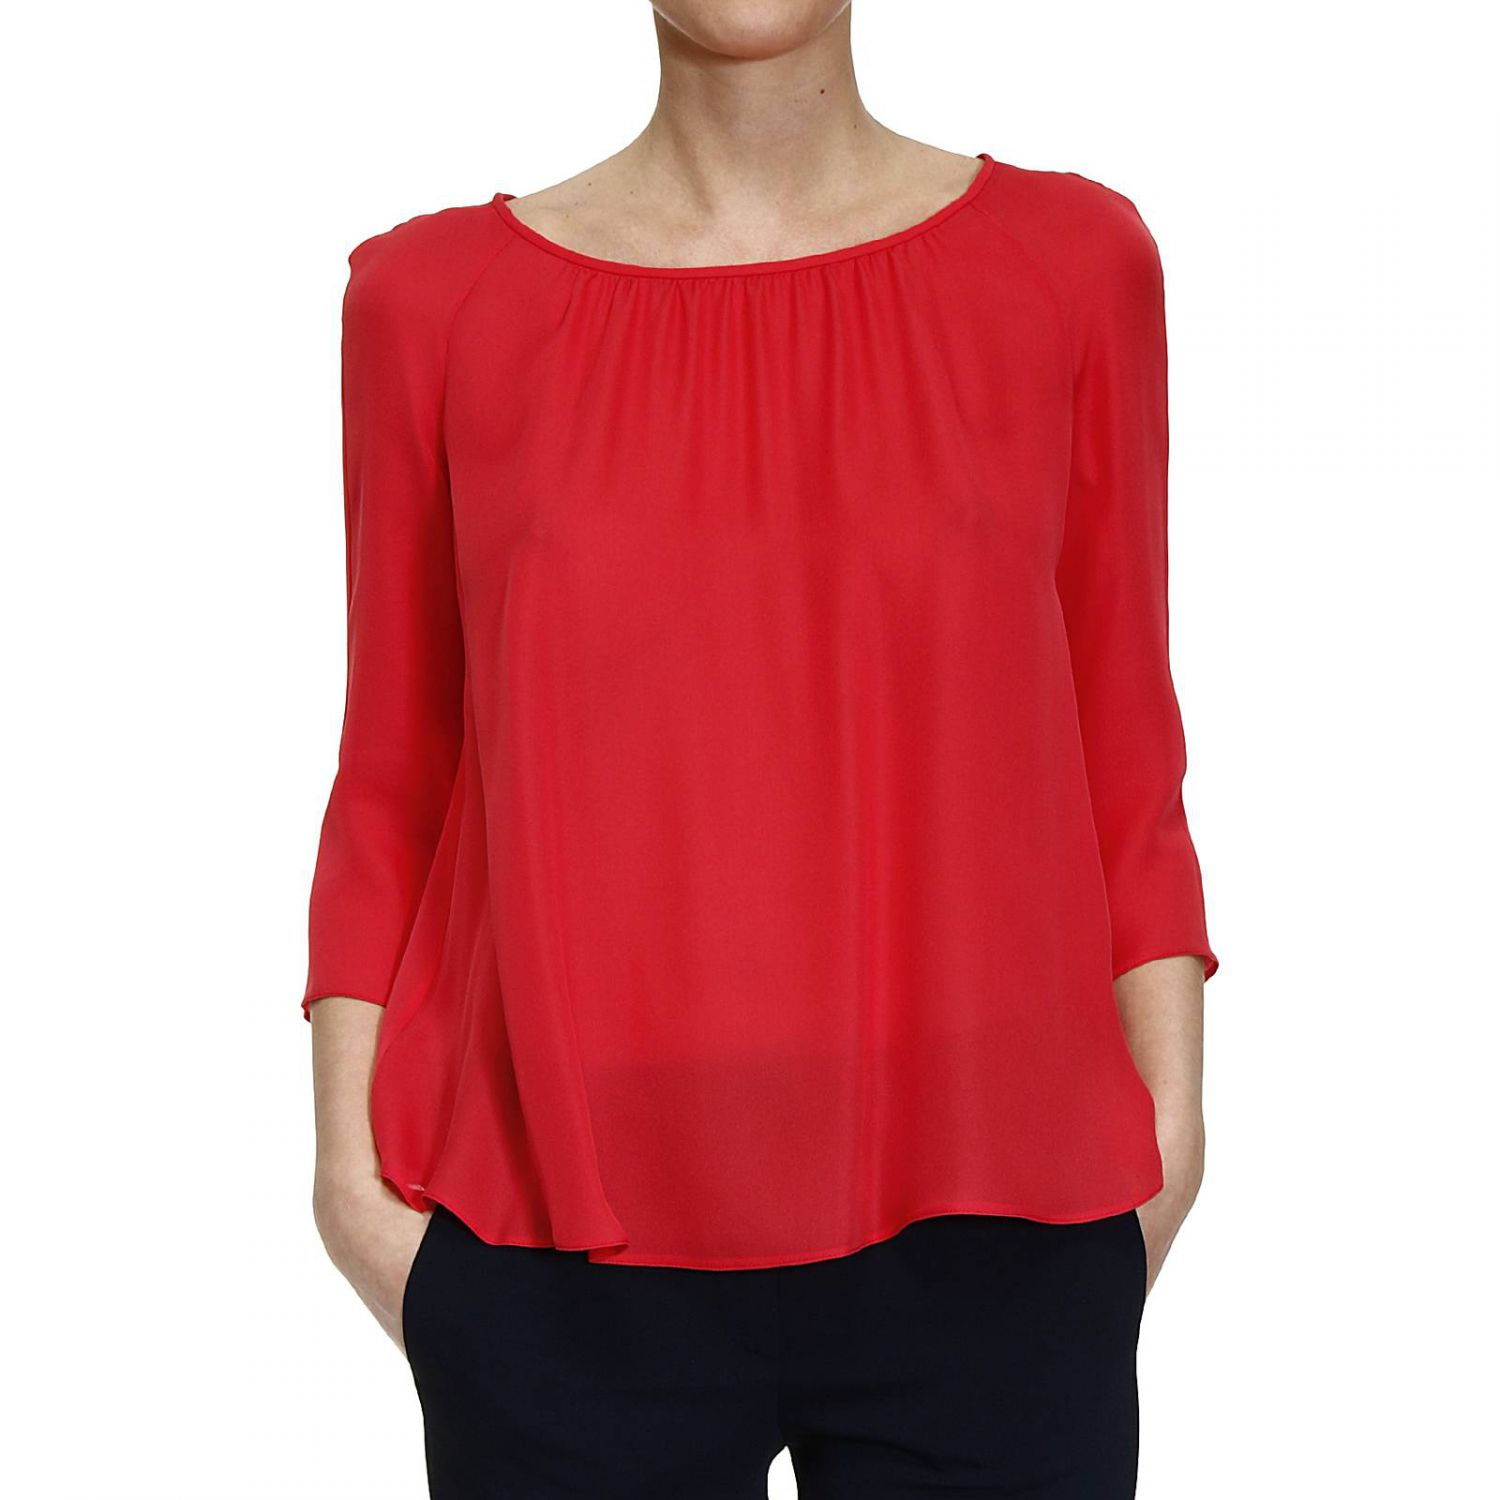 Giorgio armani Top Sleeve 3/4 Silk Over in Red | Lyst